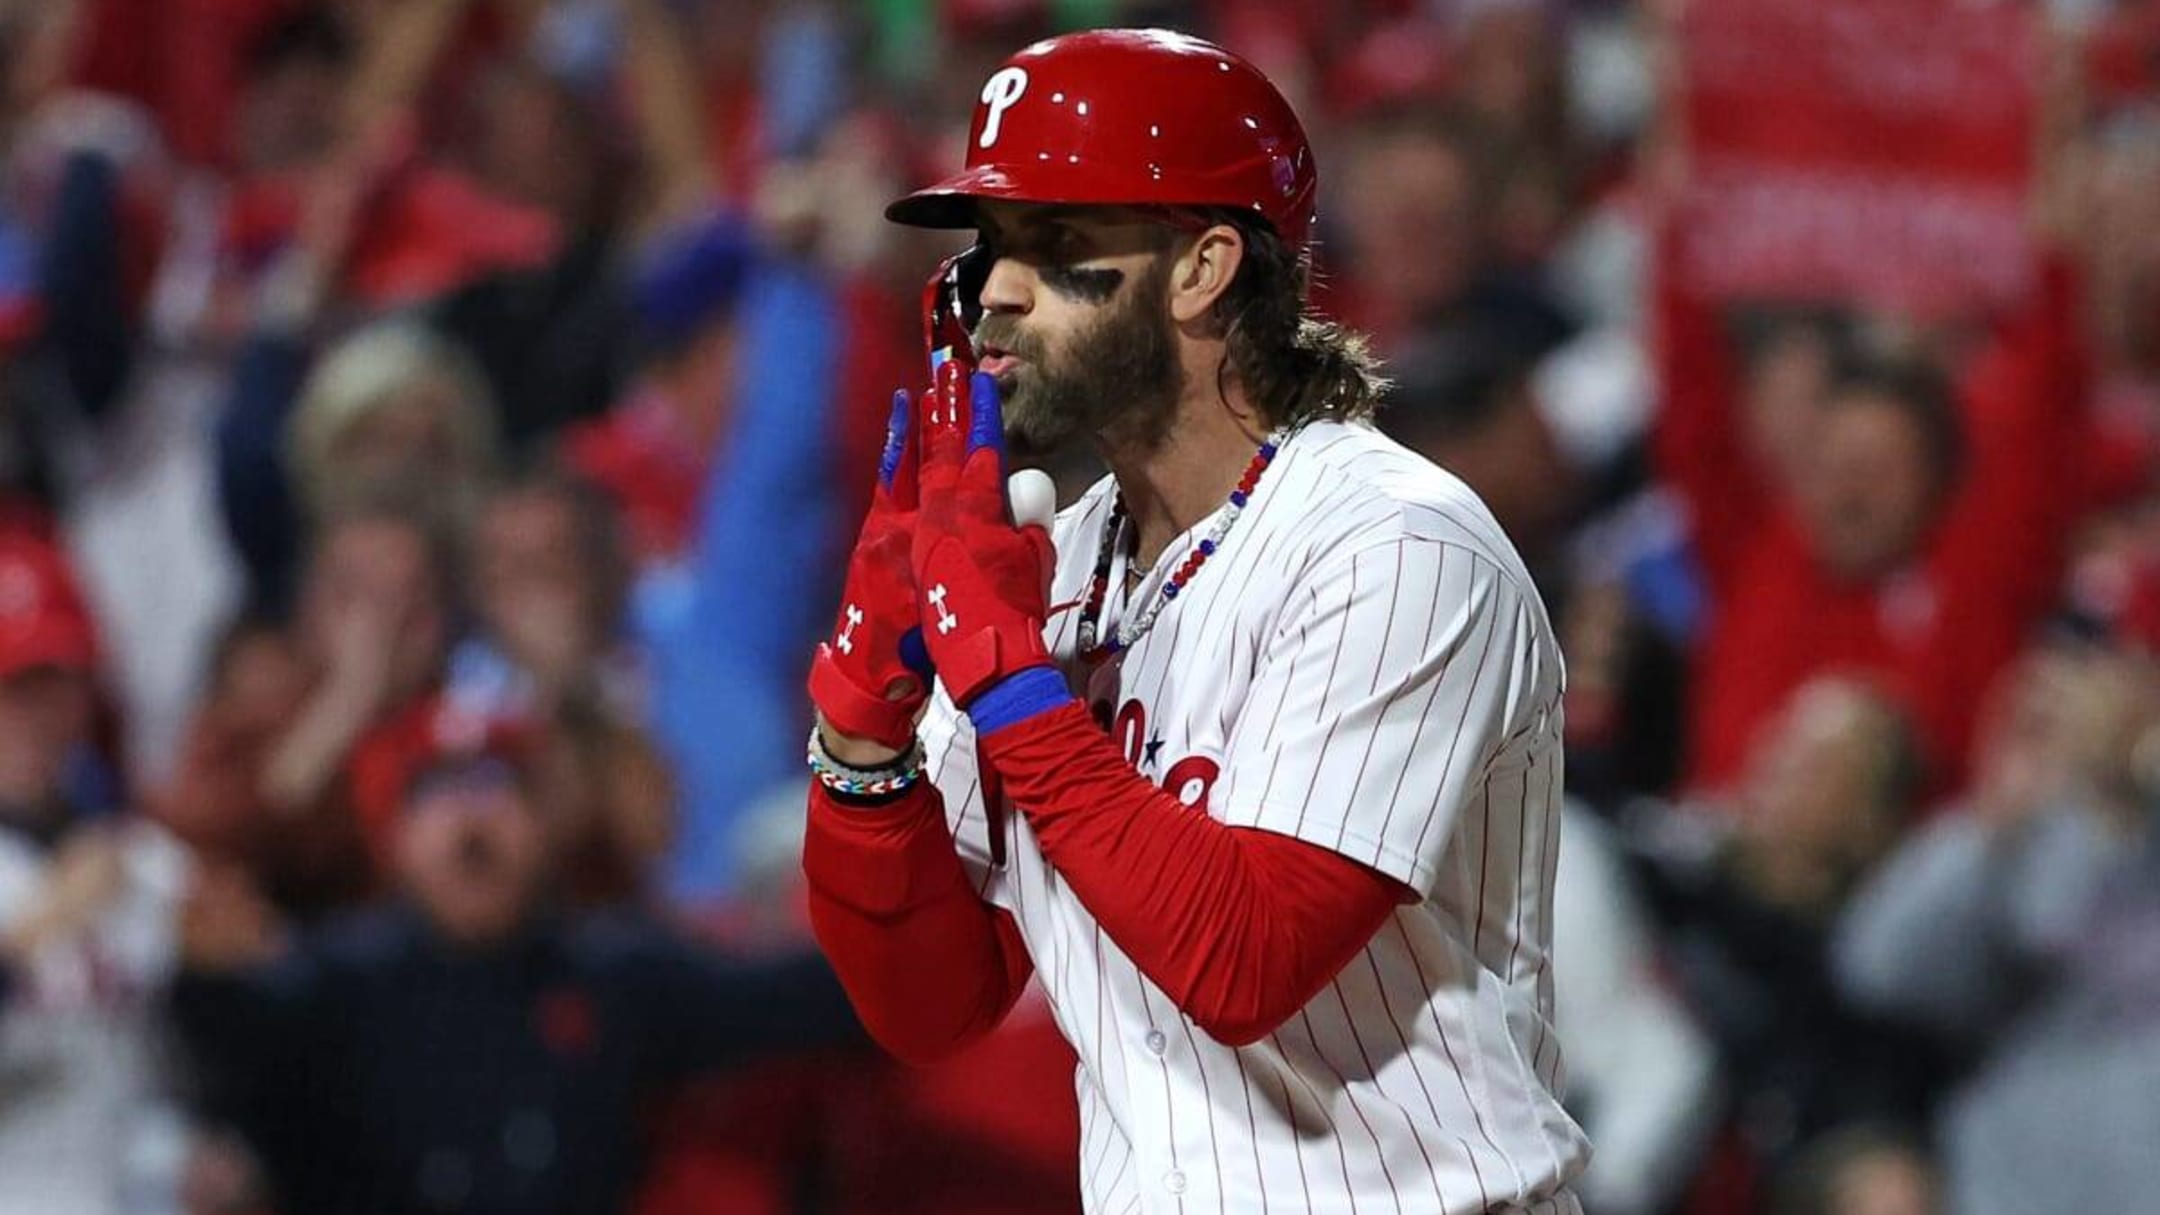 WATCH: MLB Network Insider Predicts When Bryce Harper Will Be Back